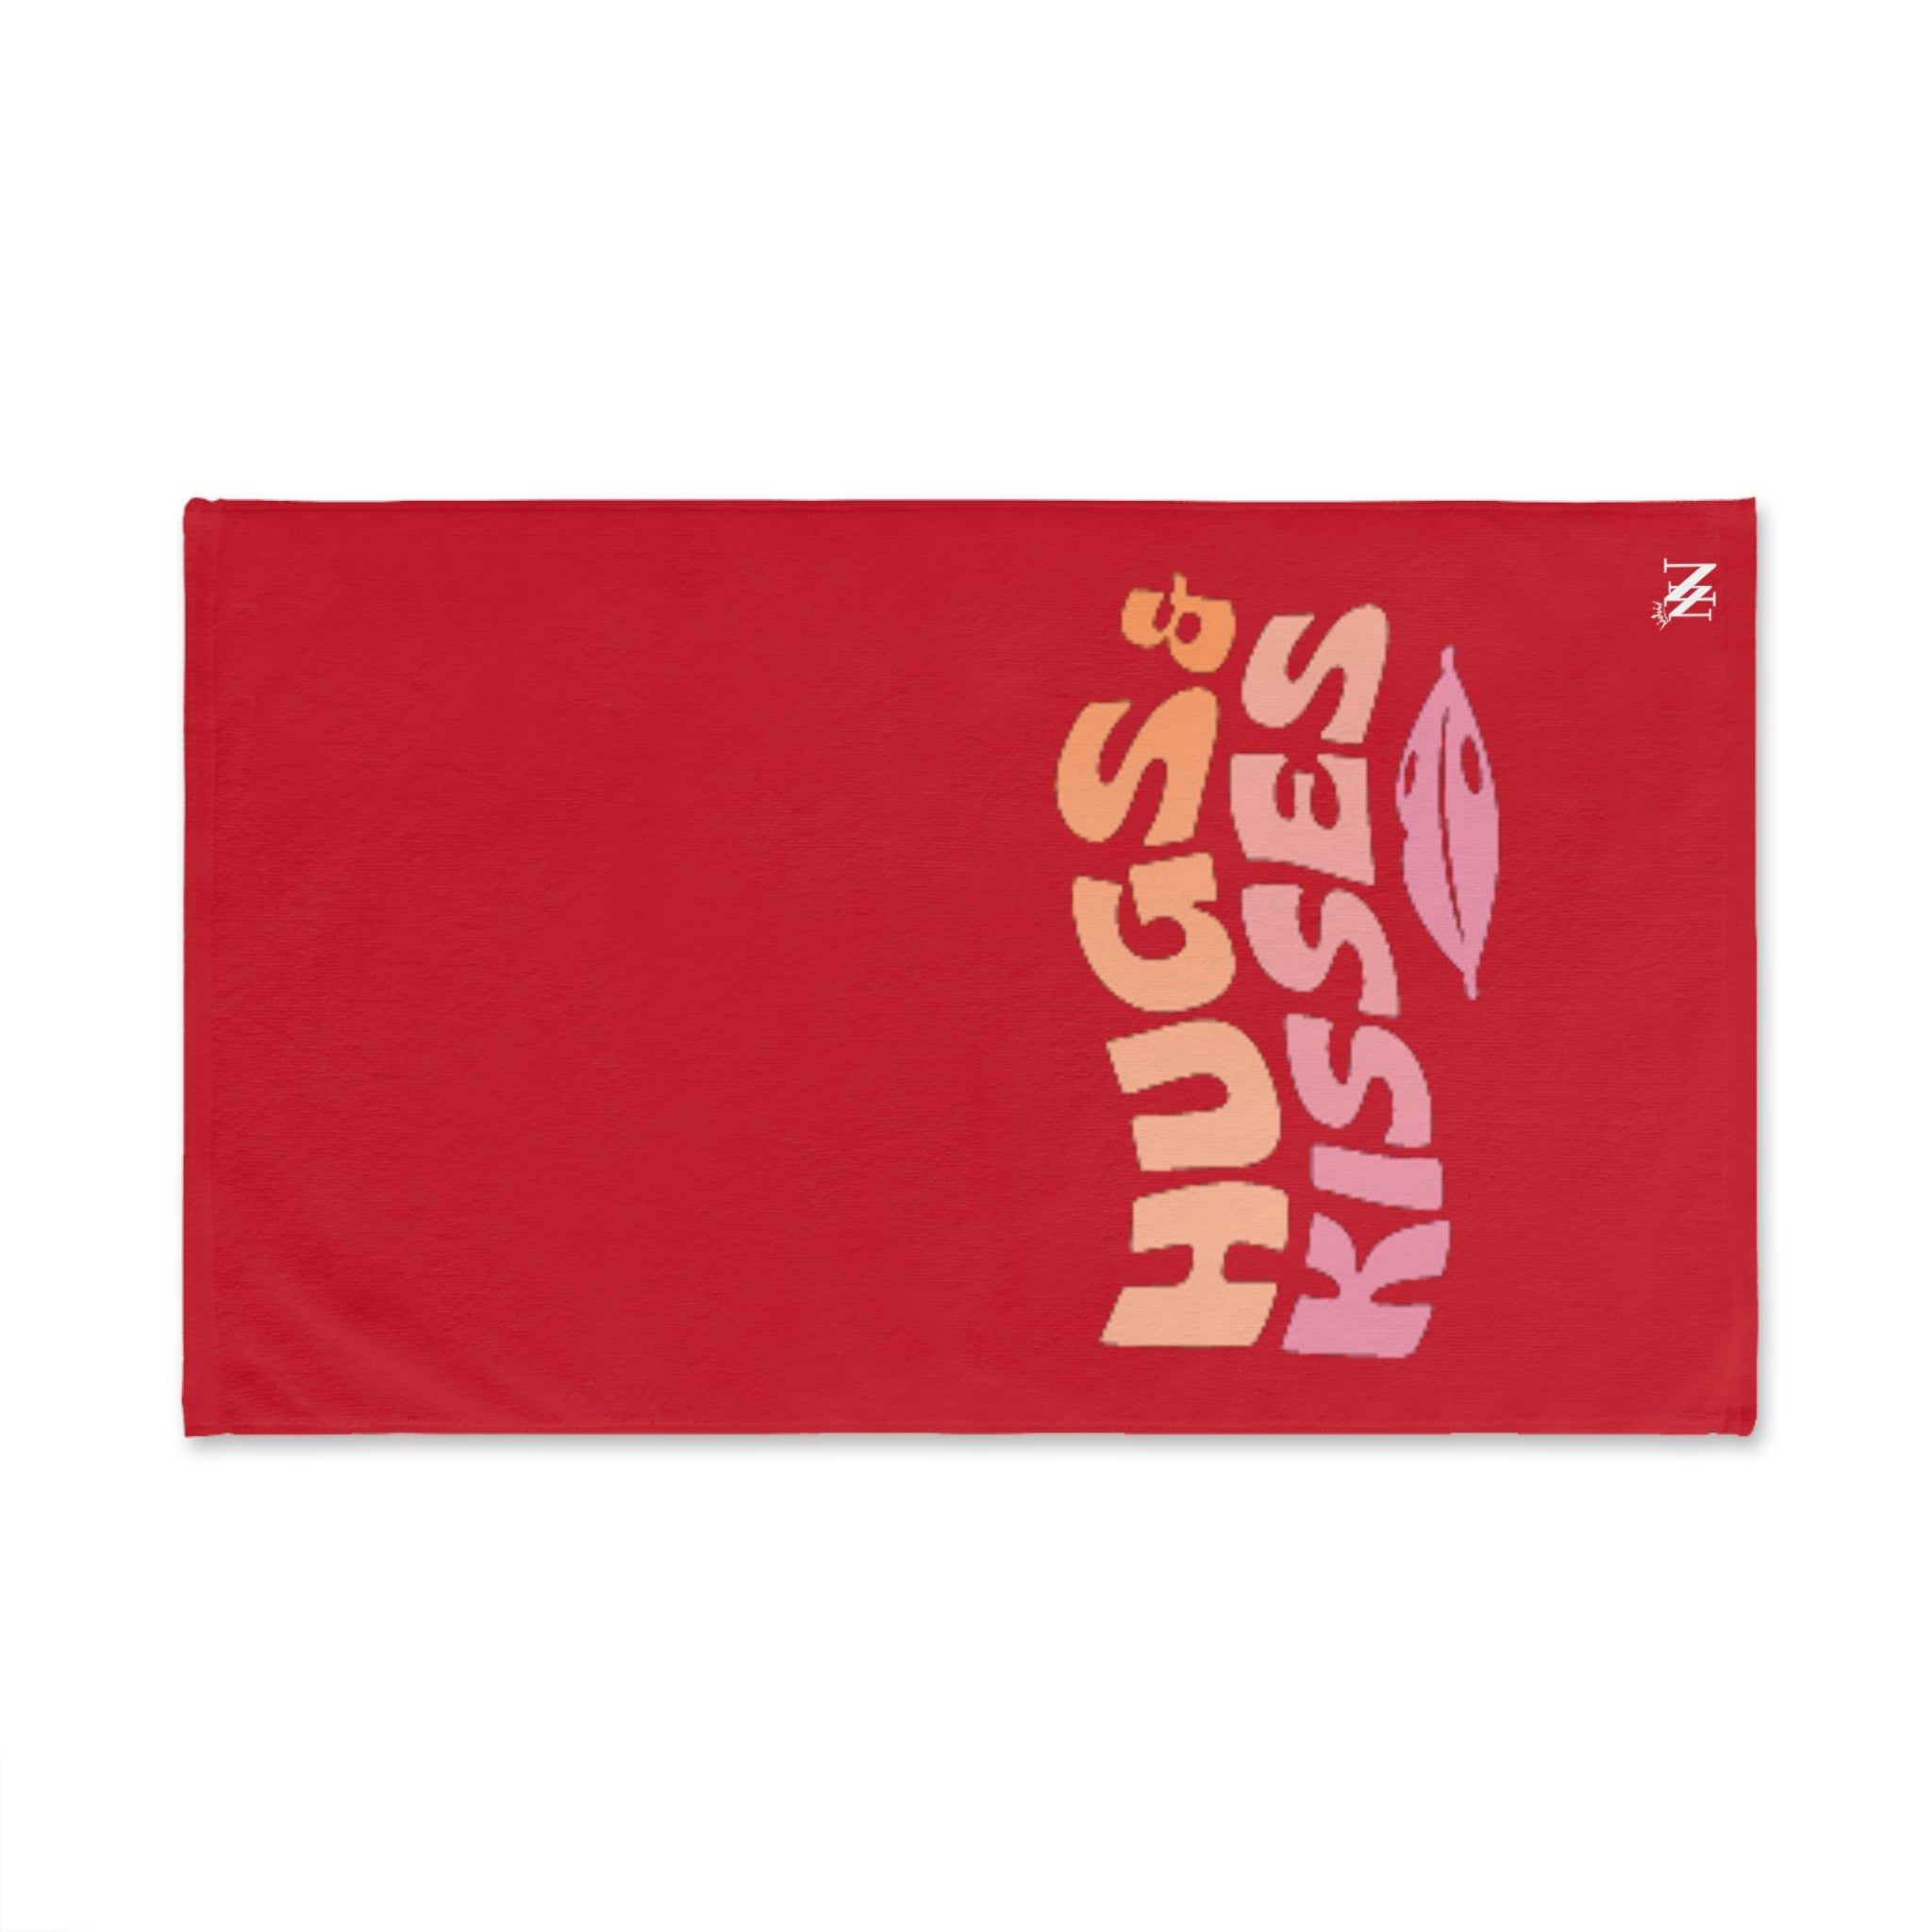 Hugs Kisses KissRed | Sexy Gifts for Boyfriend, Funny Towel Romantic Gift for Wedding Couple Fiance First Year 2nd Anniversary Valentines, Party Gag Gifts, Joke Humor Cloth for Husband Men BF NECTAR NAPKINS